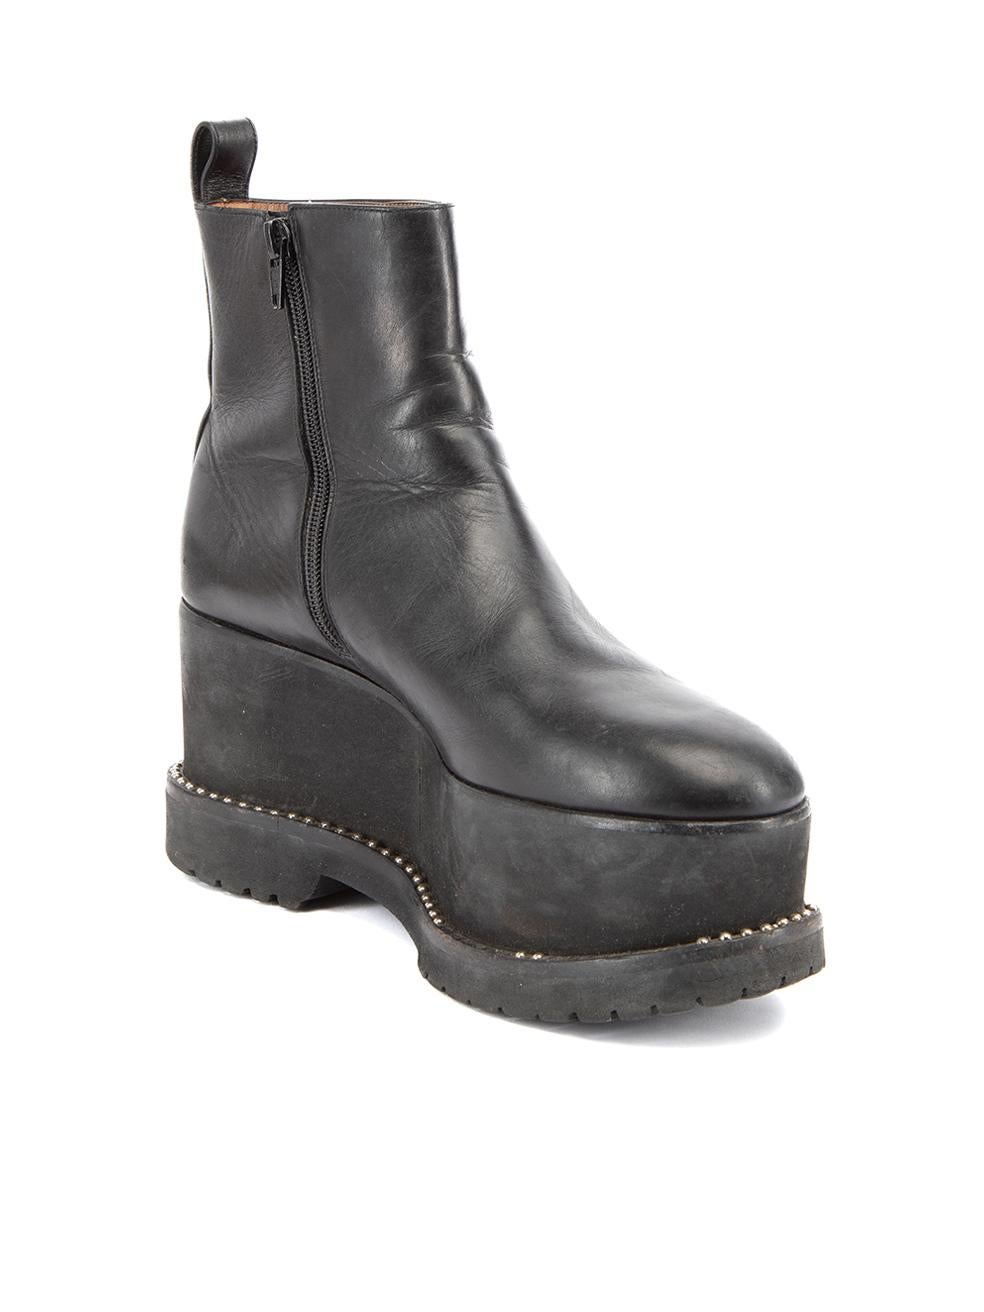 CONDITION is Very good. Minor wear to boots is evident. Minor wear to the midsole where scuffs and stains can be seen. There is also creasing to the exterior leather on this used Givenchy designer resale item. Details Black Leather Ankle boots